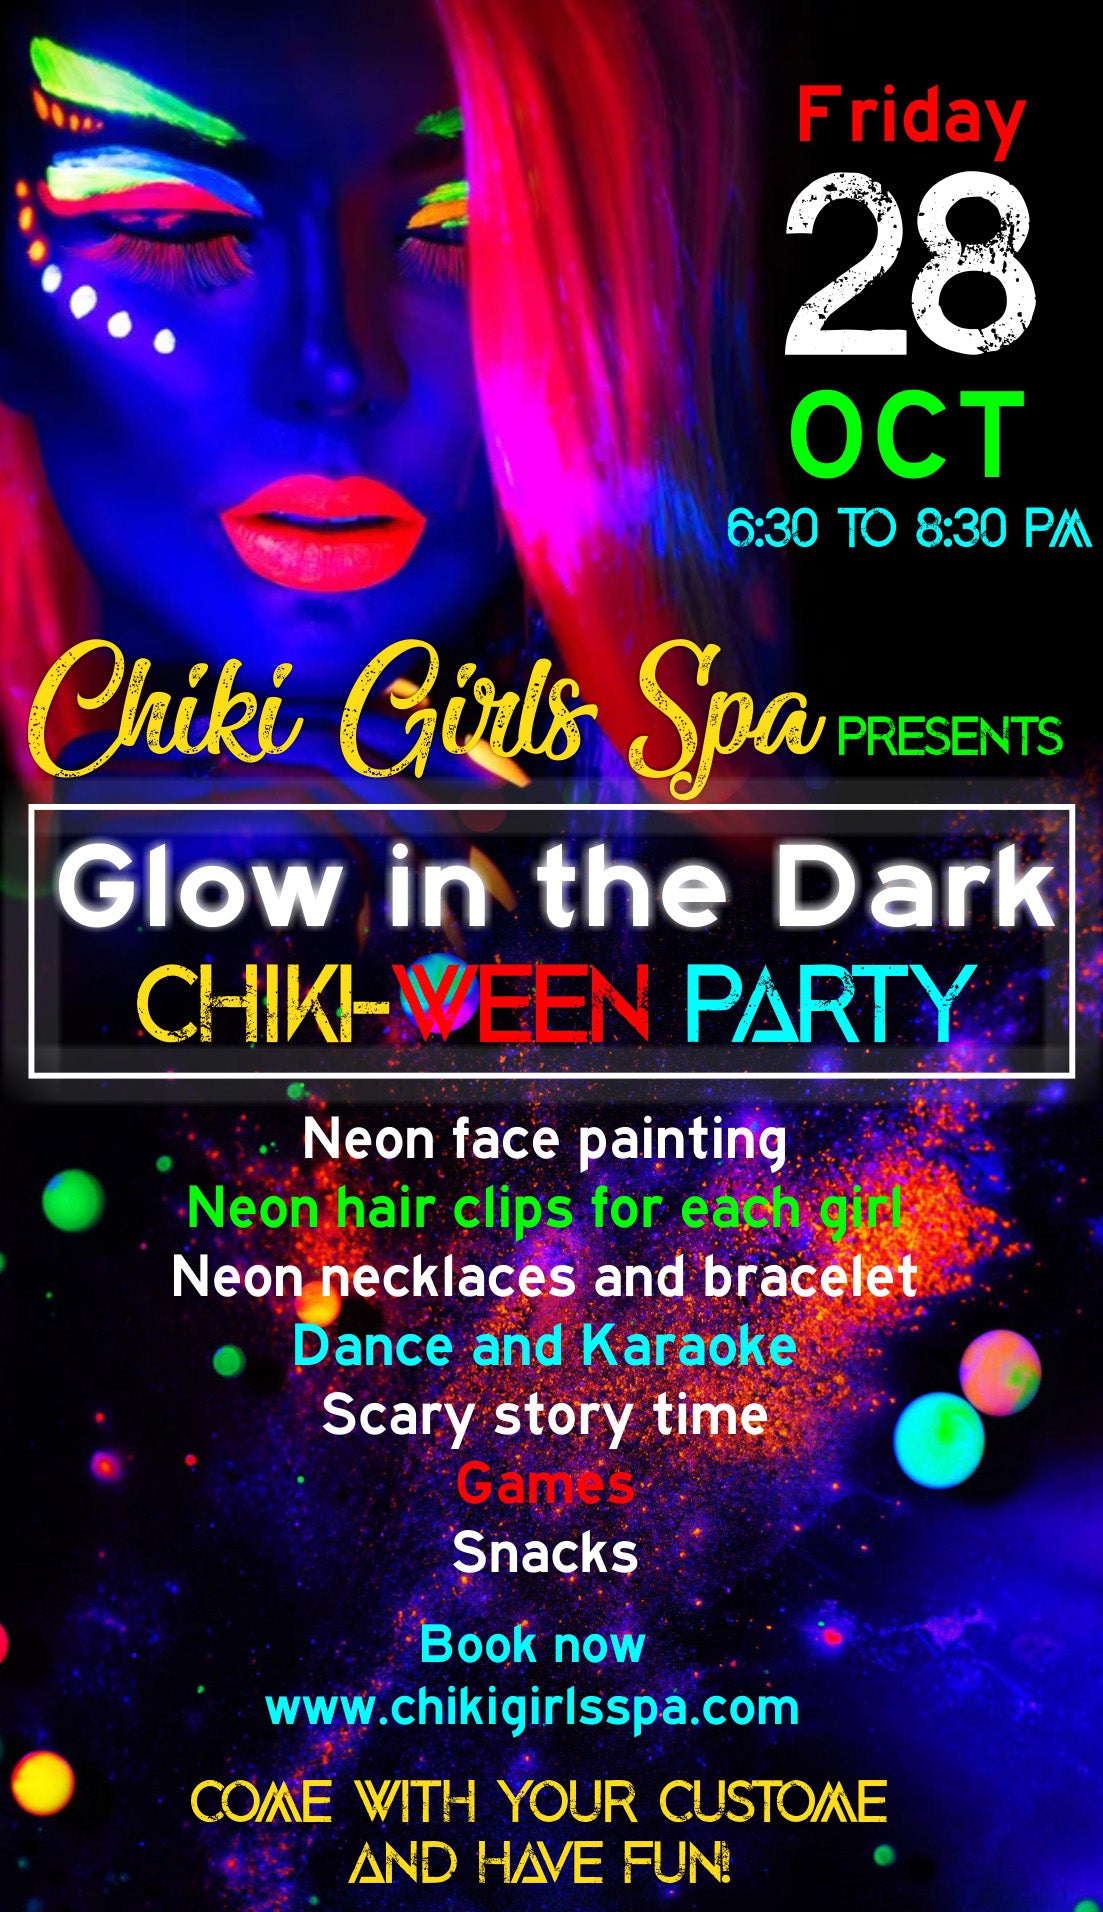 Glow in the Dark-Chiki-ween party